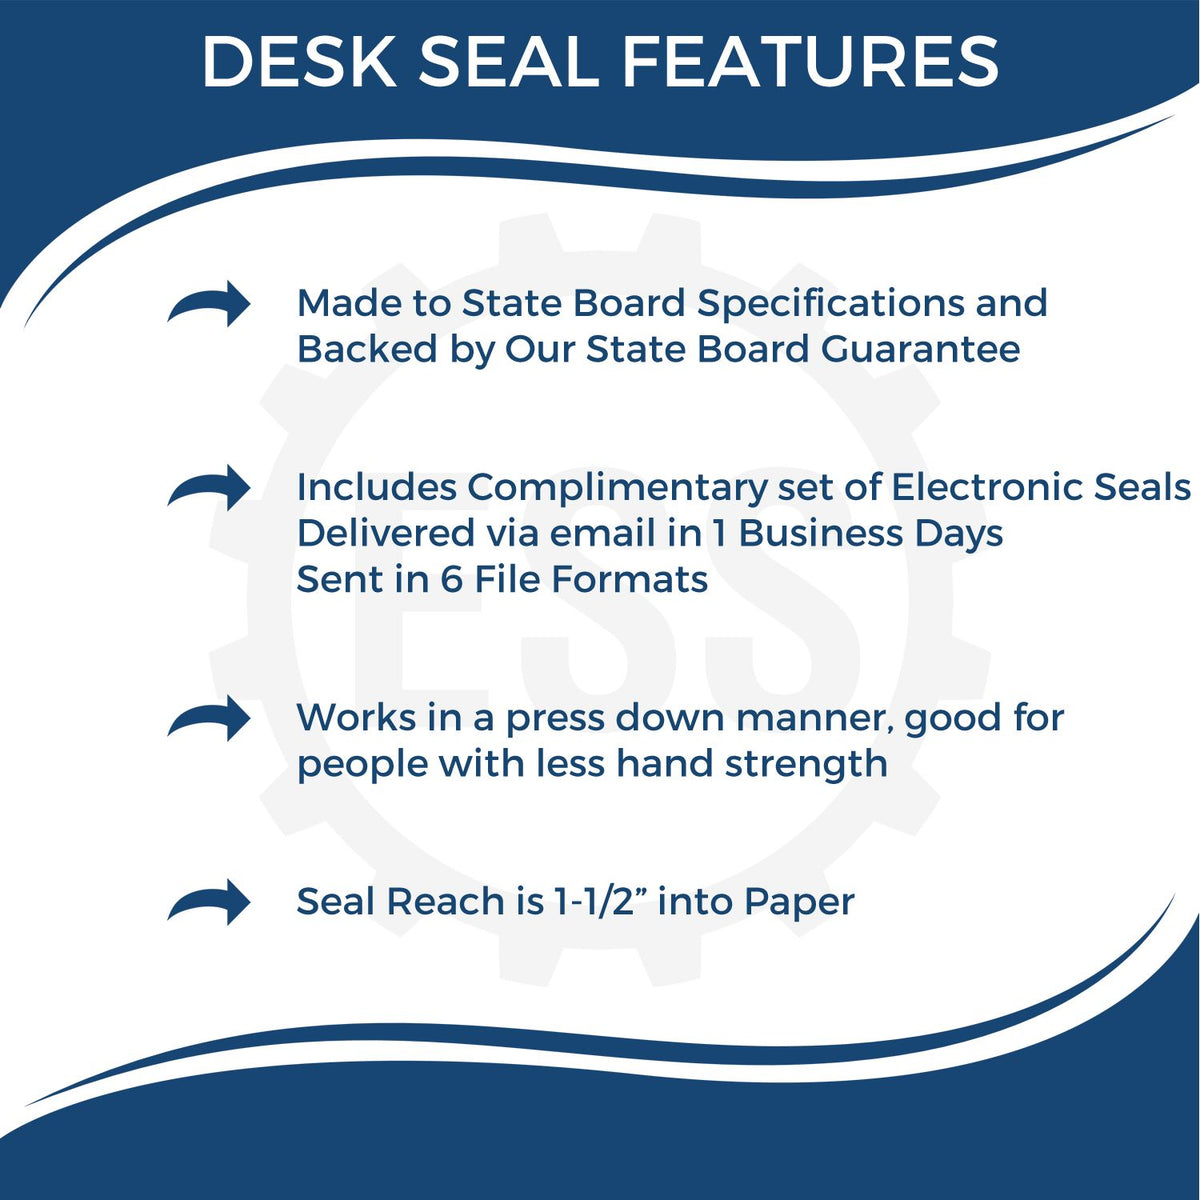 A picture of an infographic highlighting the selling points for the Illinois Geologist Desk Seal